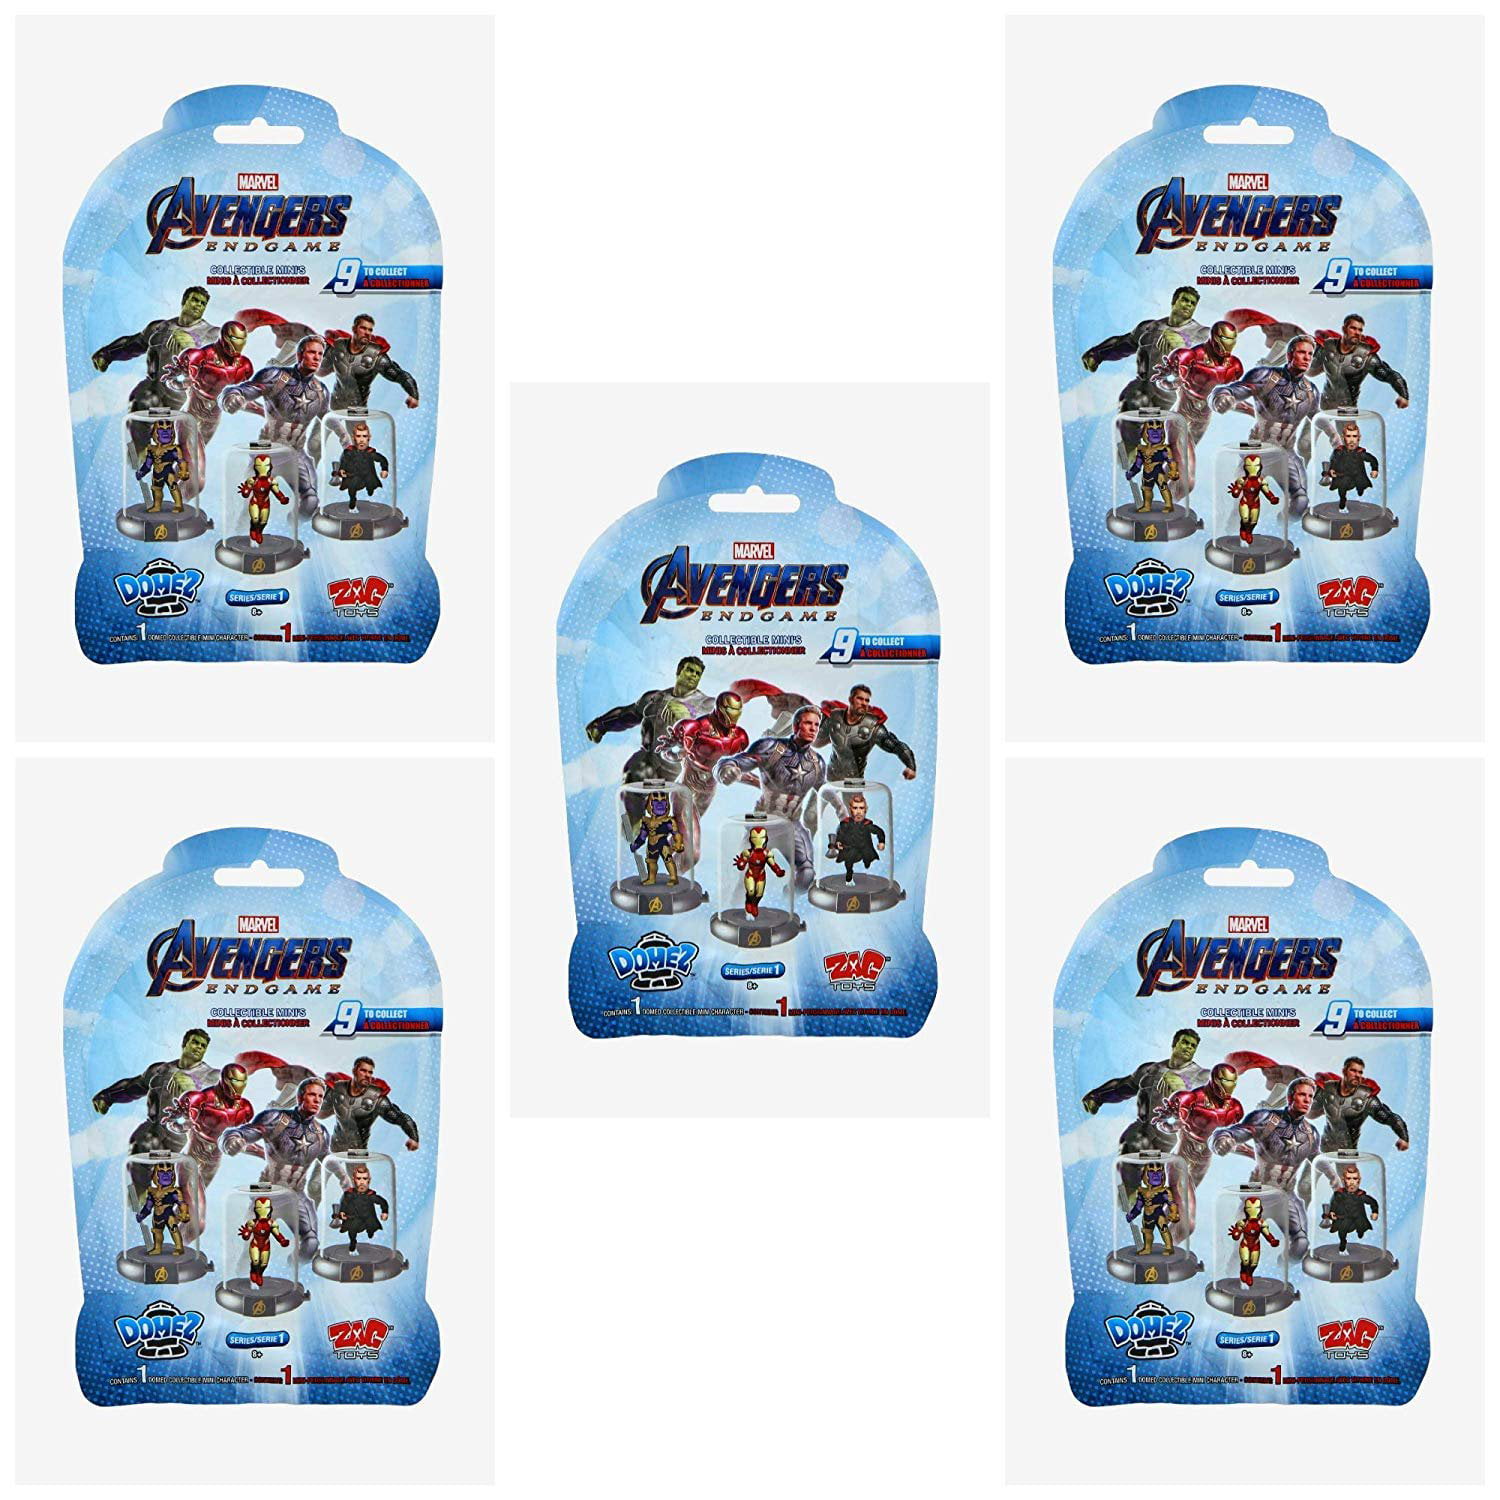 Batman Collectible Minis Domez Series 1 Complete Set of 9 With Chase Variant A7 for sale online 